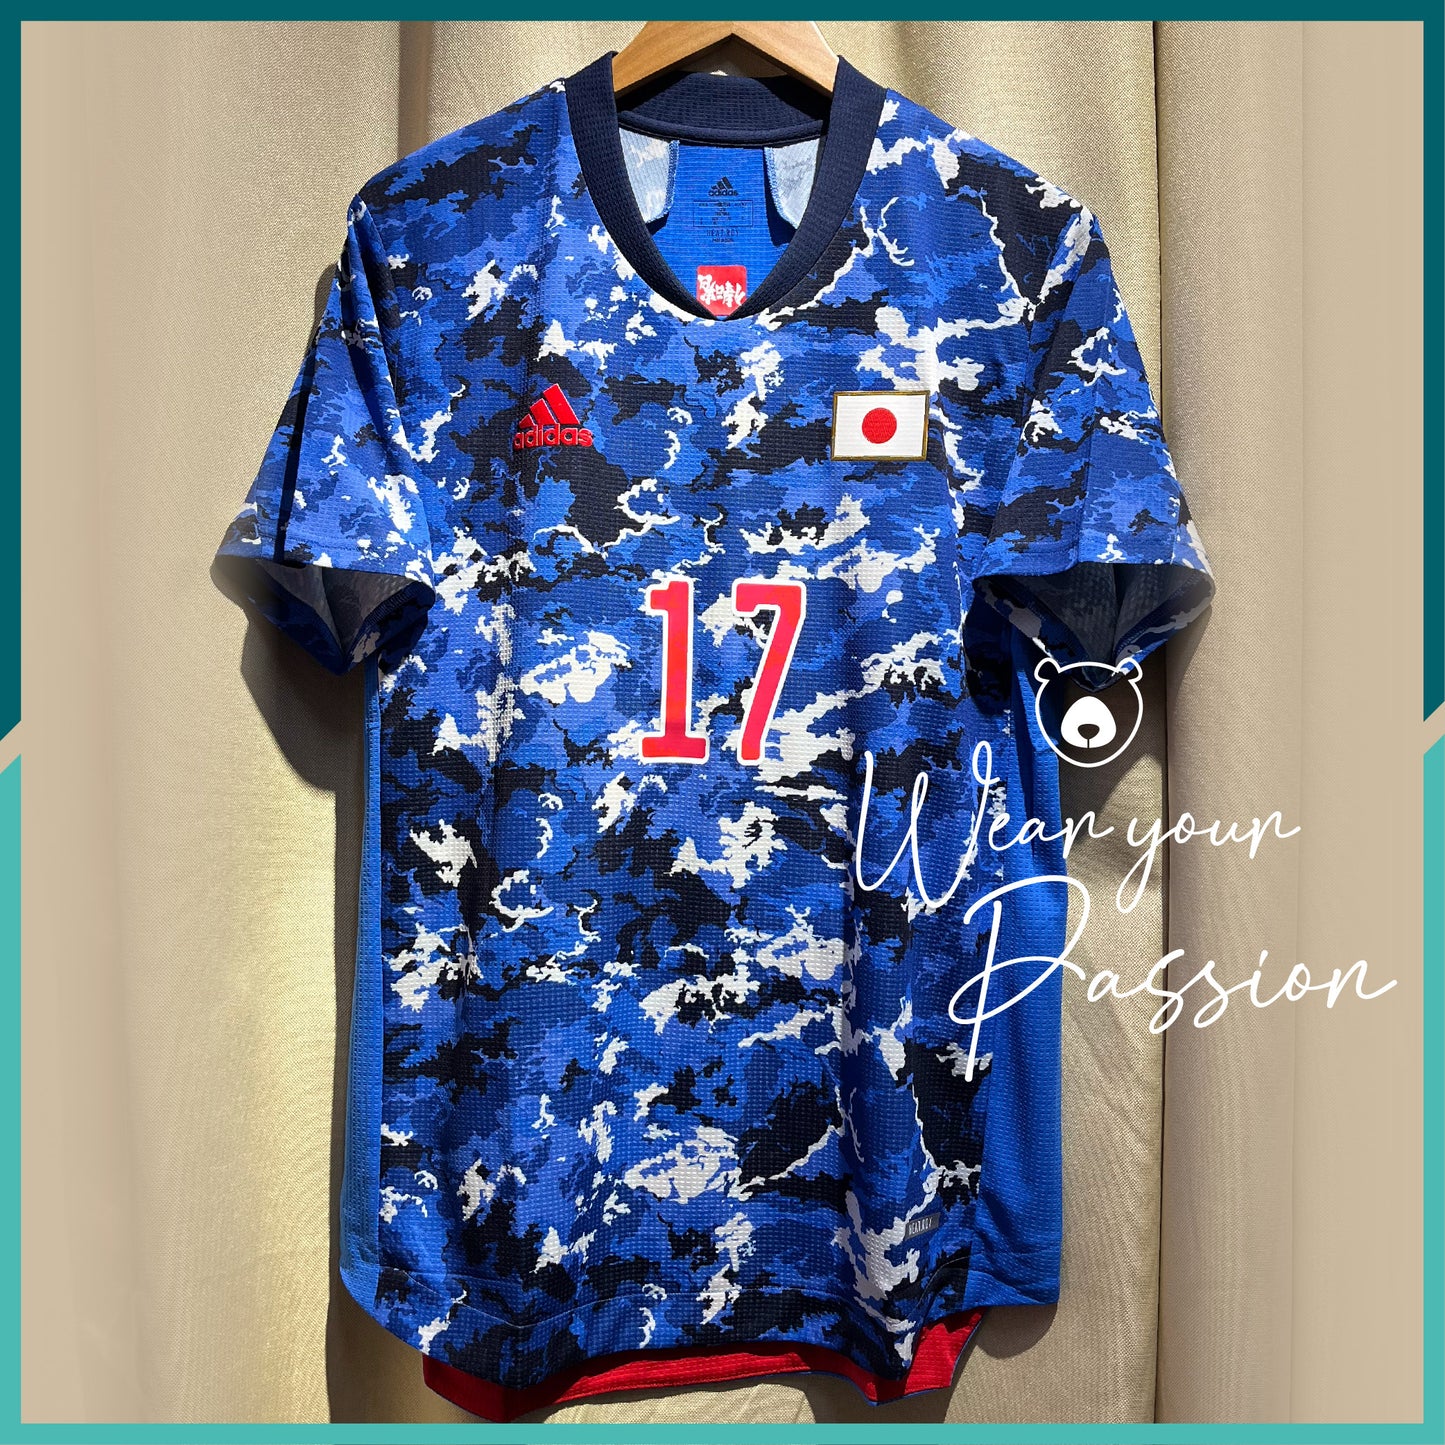 (Authentic) Japan Tokyo 2020 Home Jersey